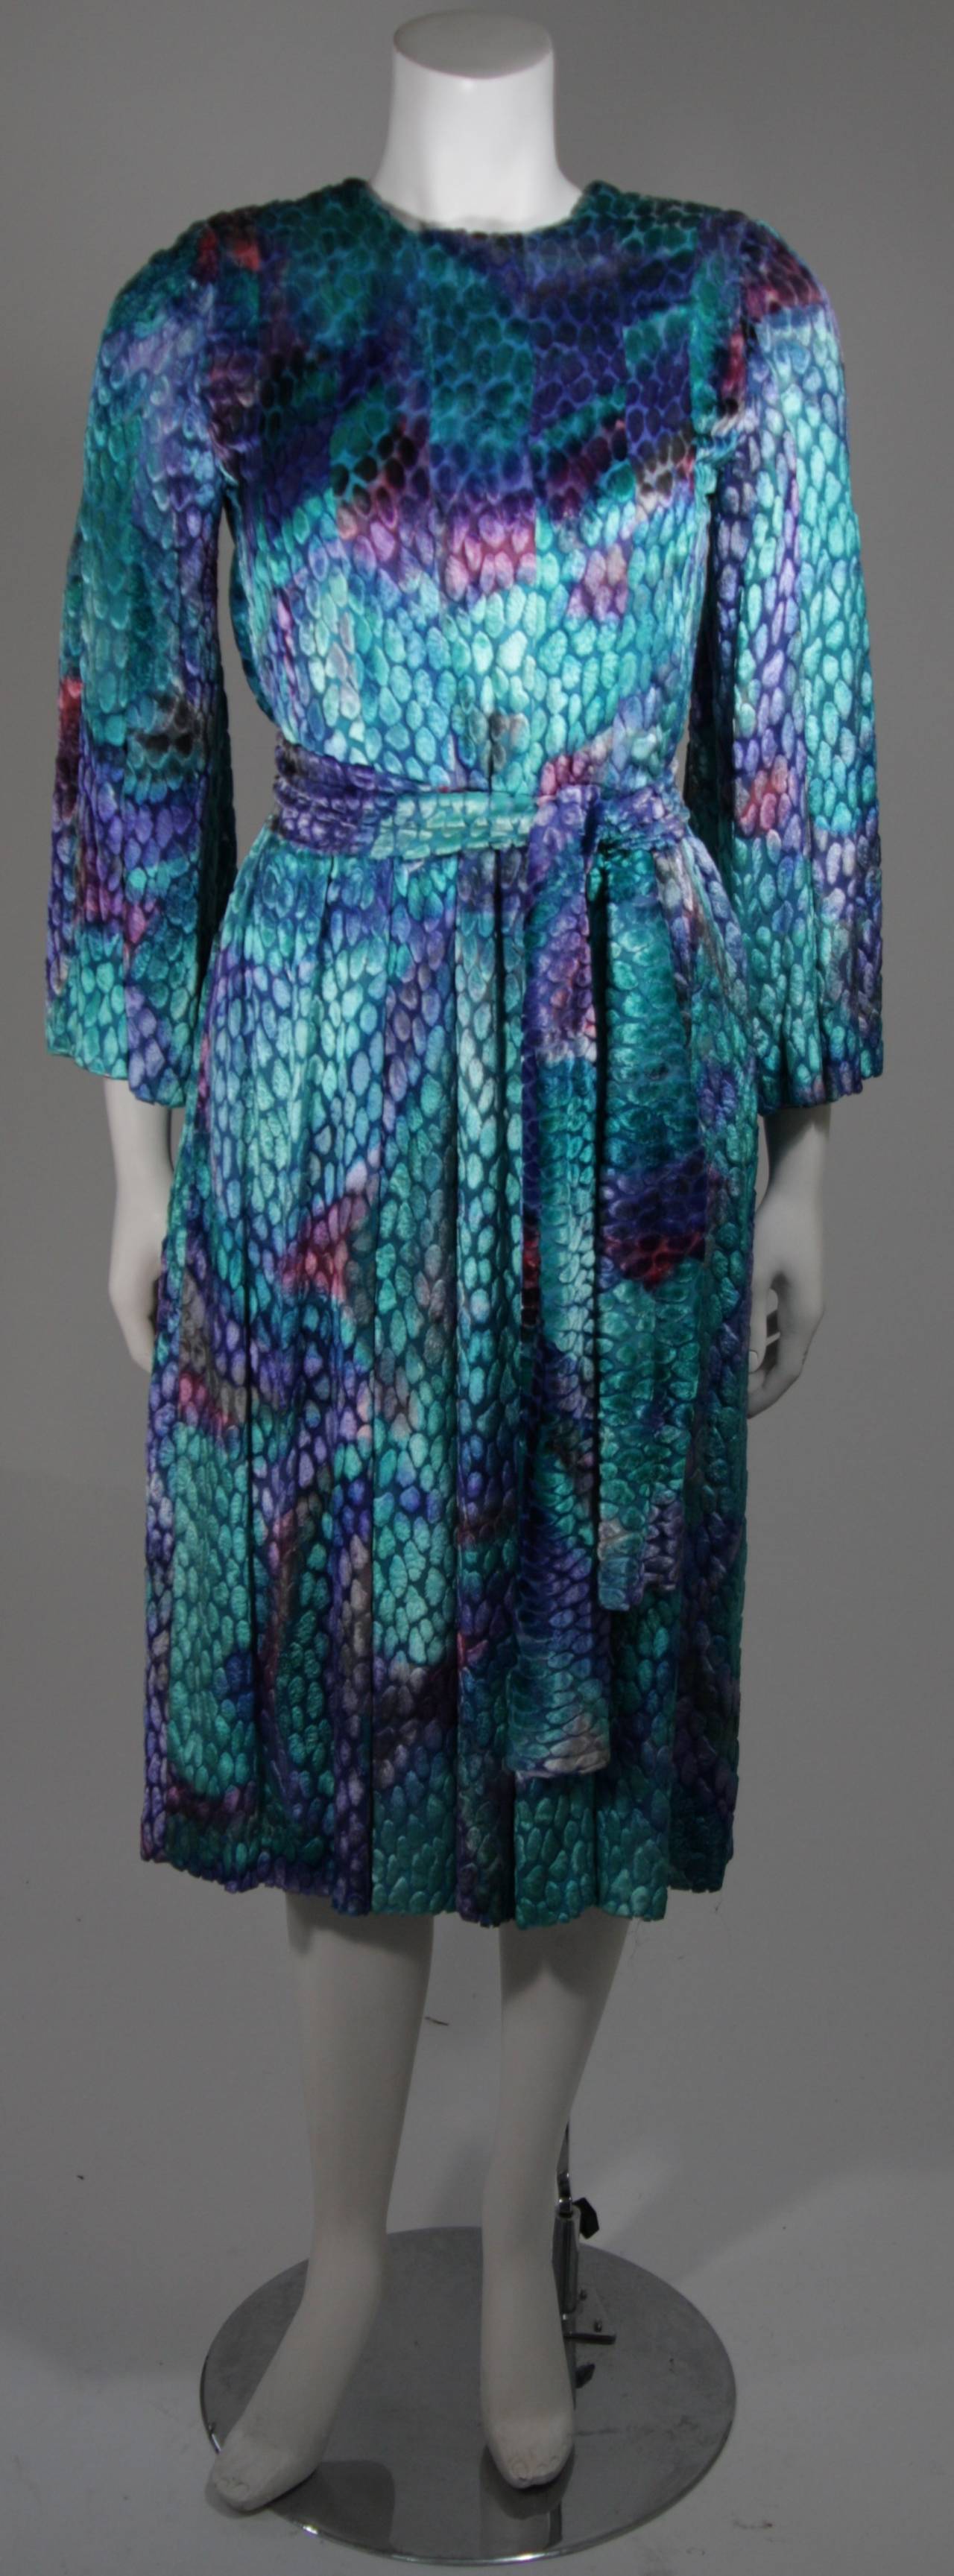 This Pauline Trigere dress is composed of a spectacular mutli-tone velvet burn out in turquoise with splashes of magenta throughout. The dress features a flared sleeve and there is a center back zipper. The wrap may be fashioned in anyway you